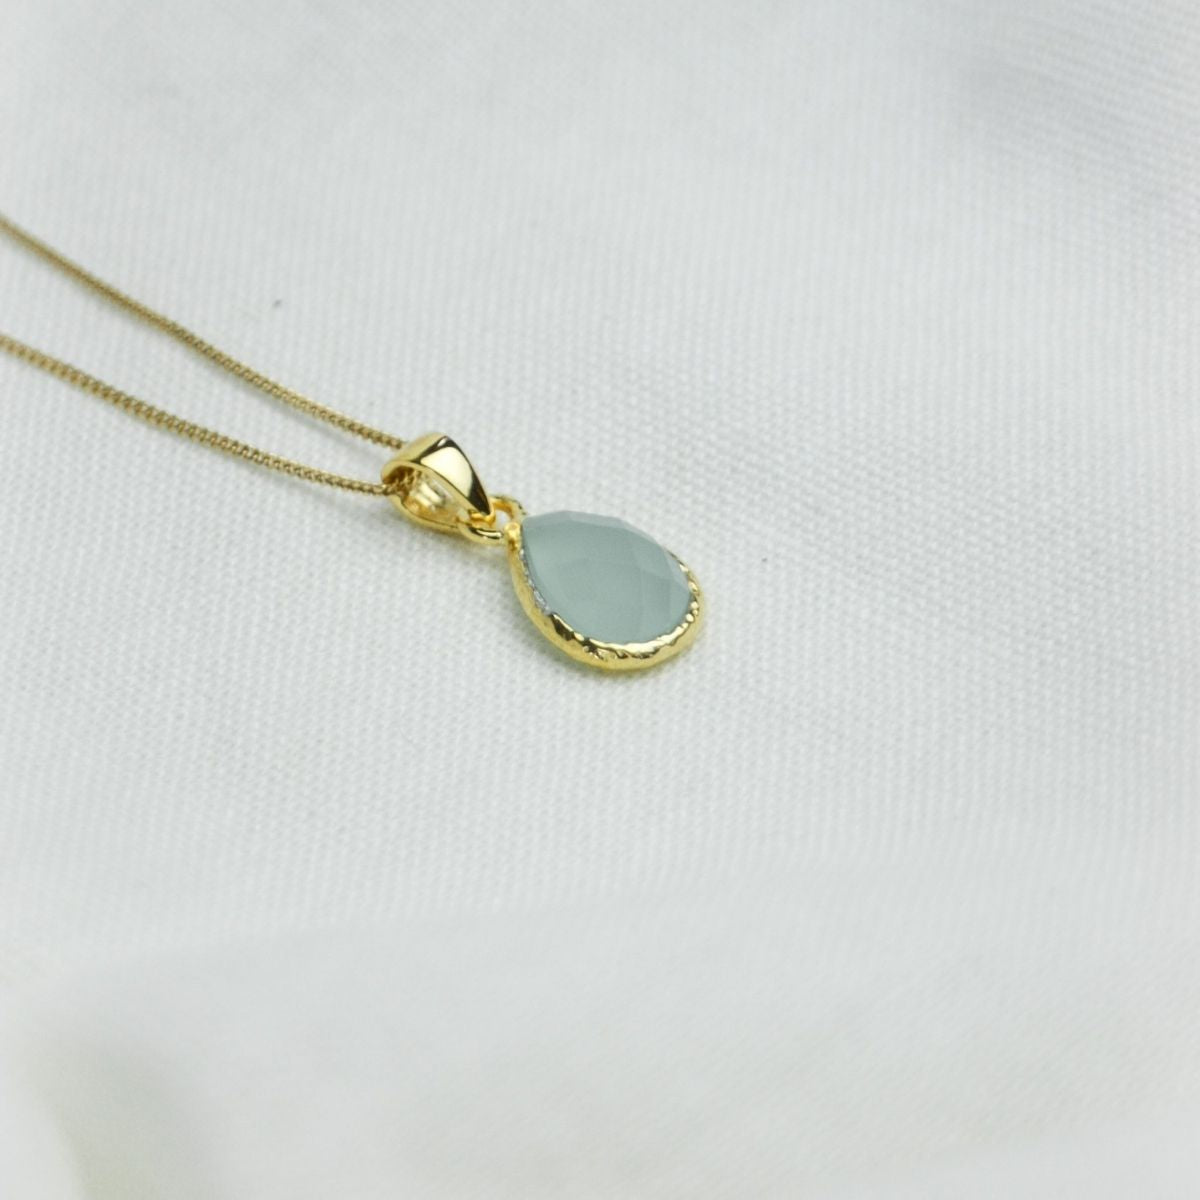 a blue pendant necklace on a white cloth